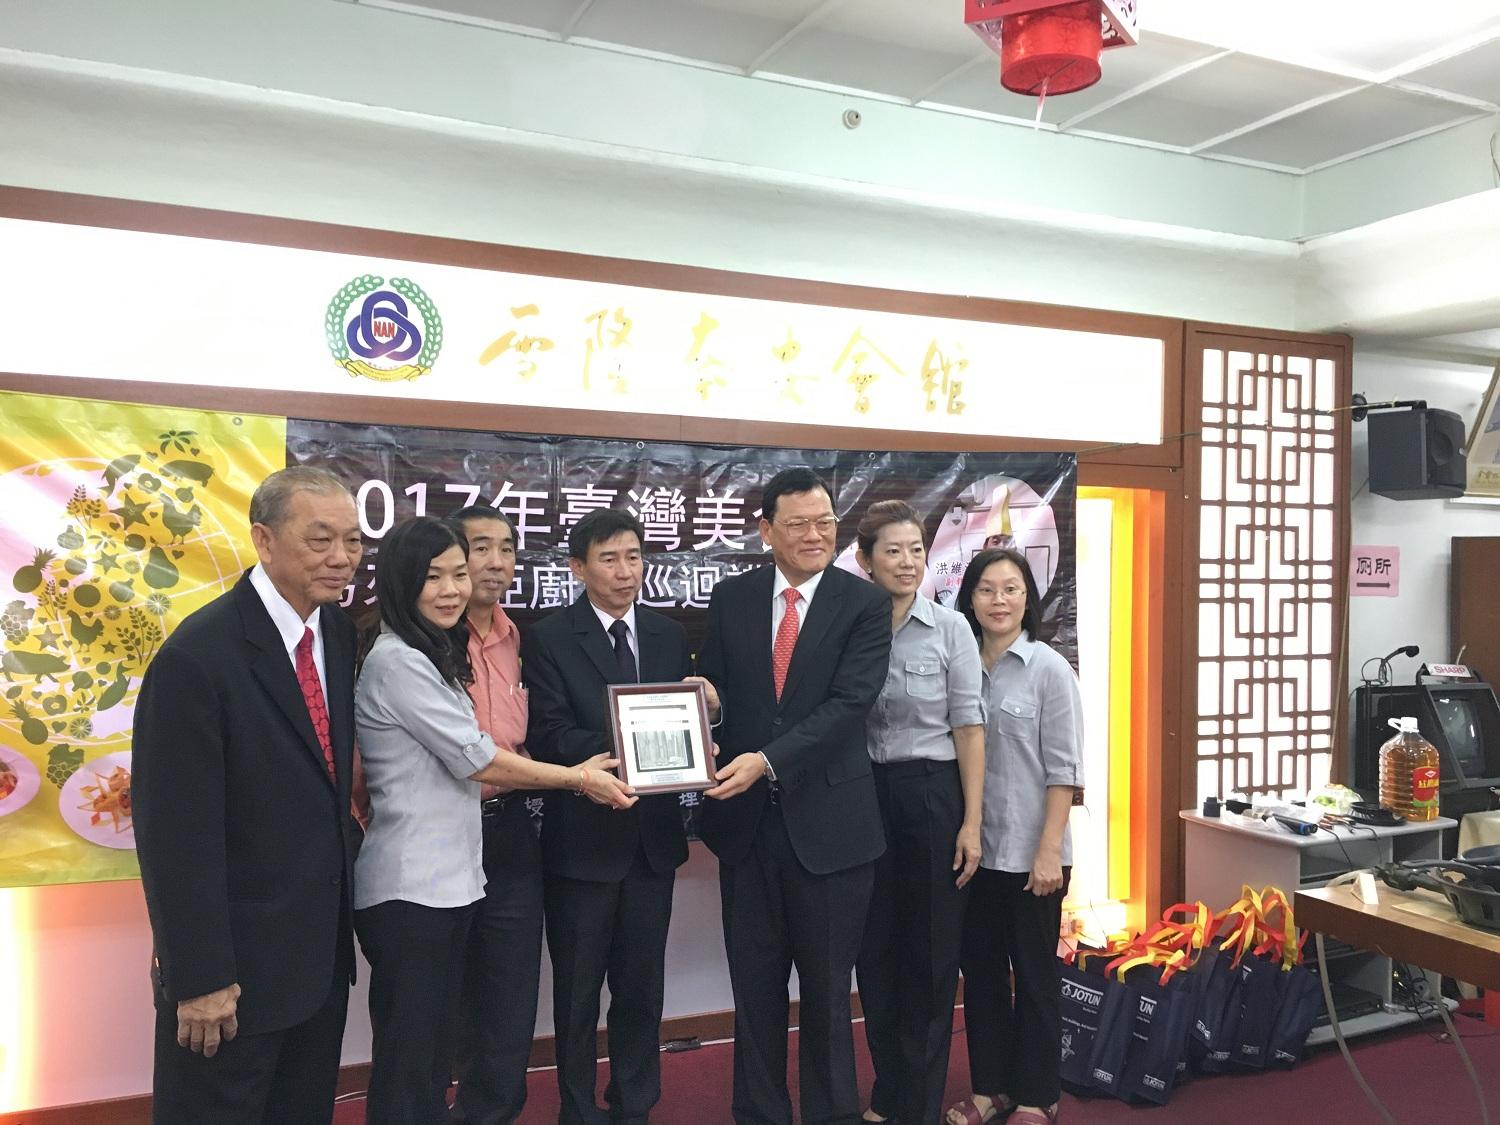 Representative Chang, James Chi-ping (right three) attends Malayysia area 2017 Tour Of Taiwan Gourmet Cuisines Opening ceremony and   President Kang Beng Hooi (left four) and winning students photo.